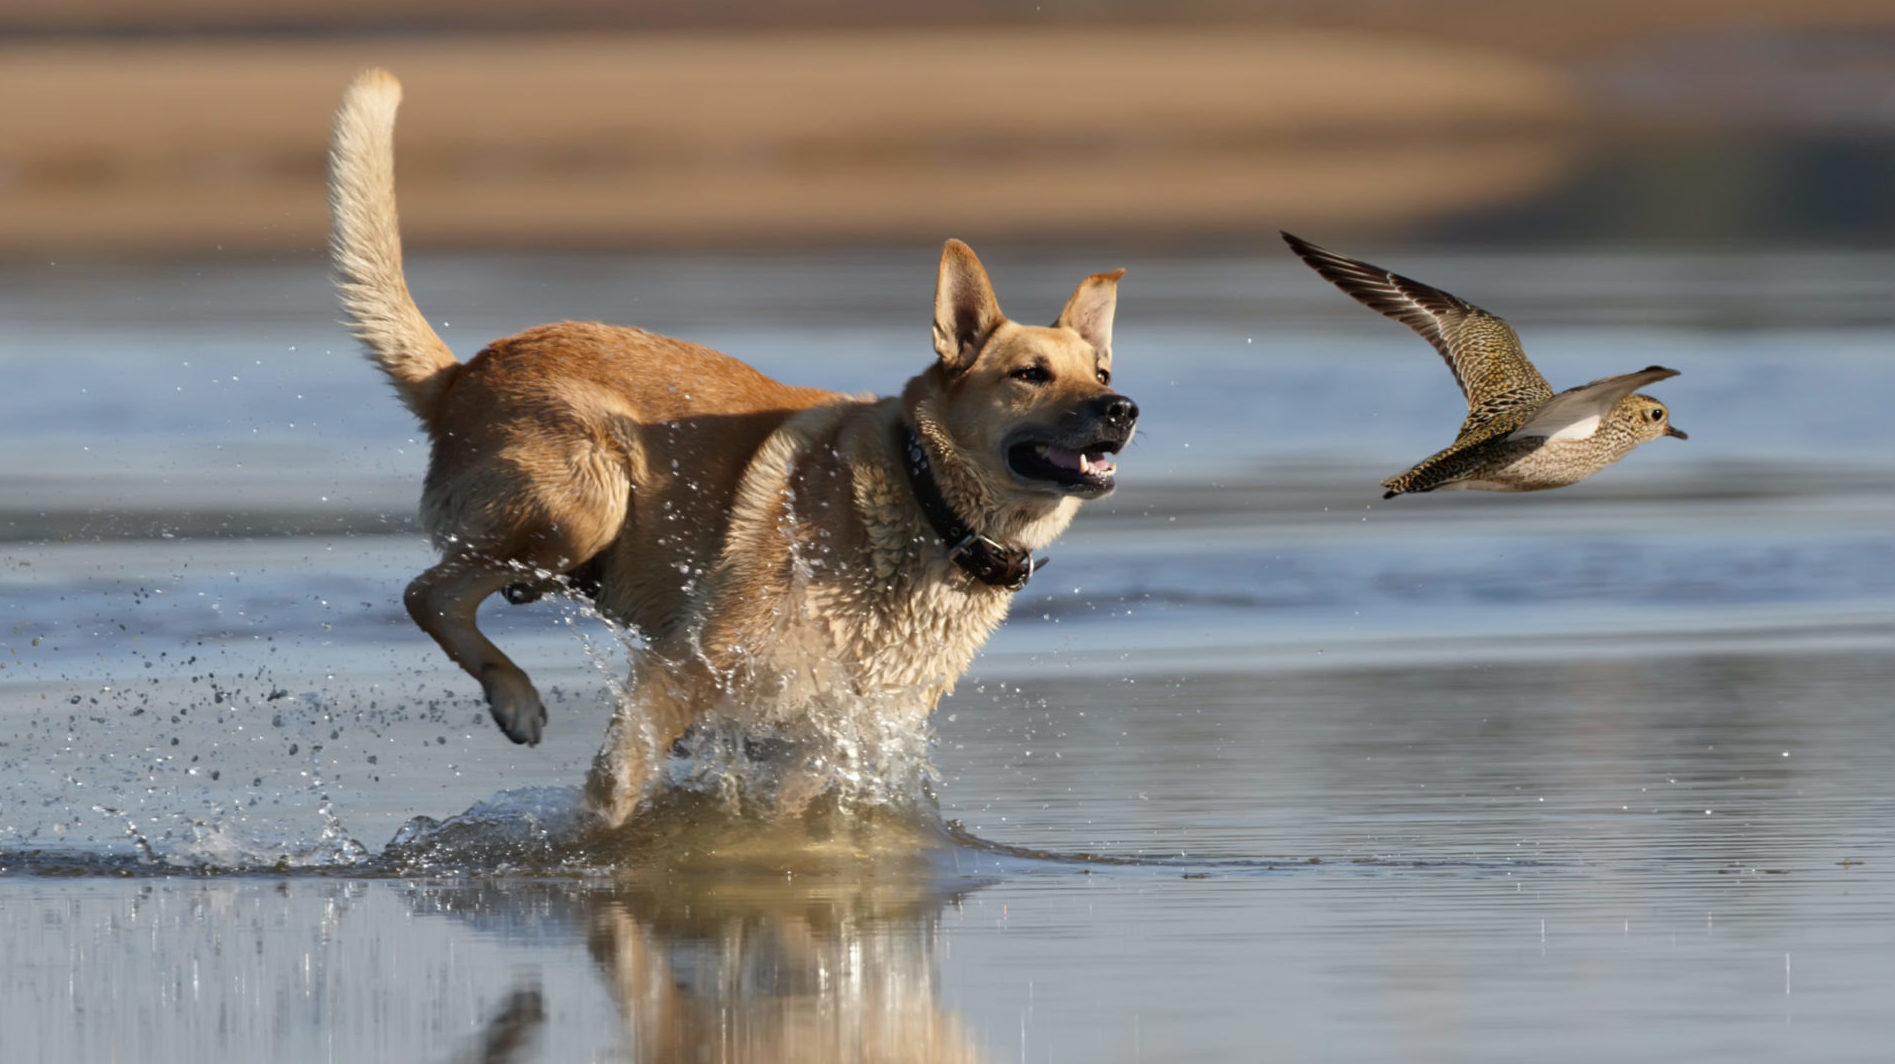 Dog and bird in water